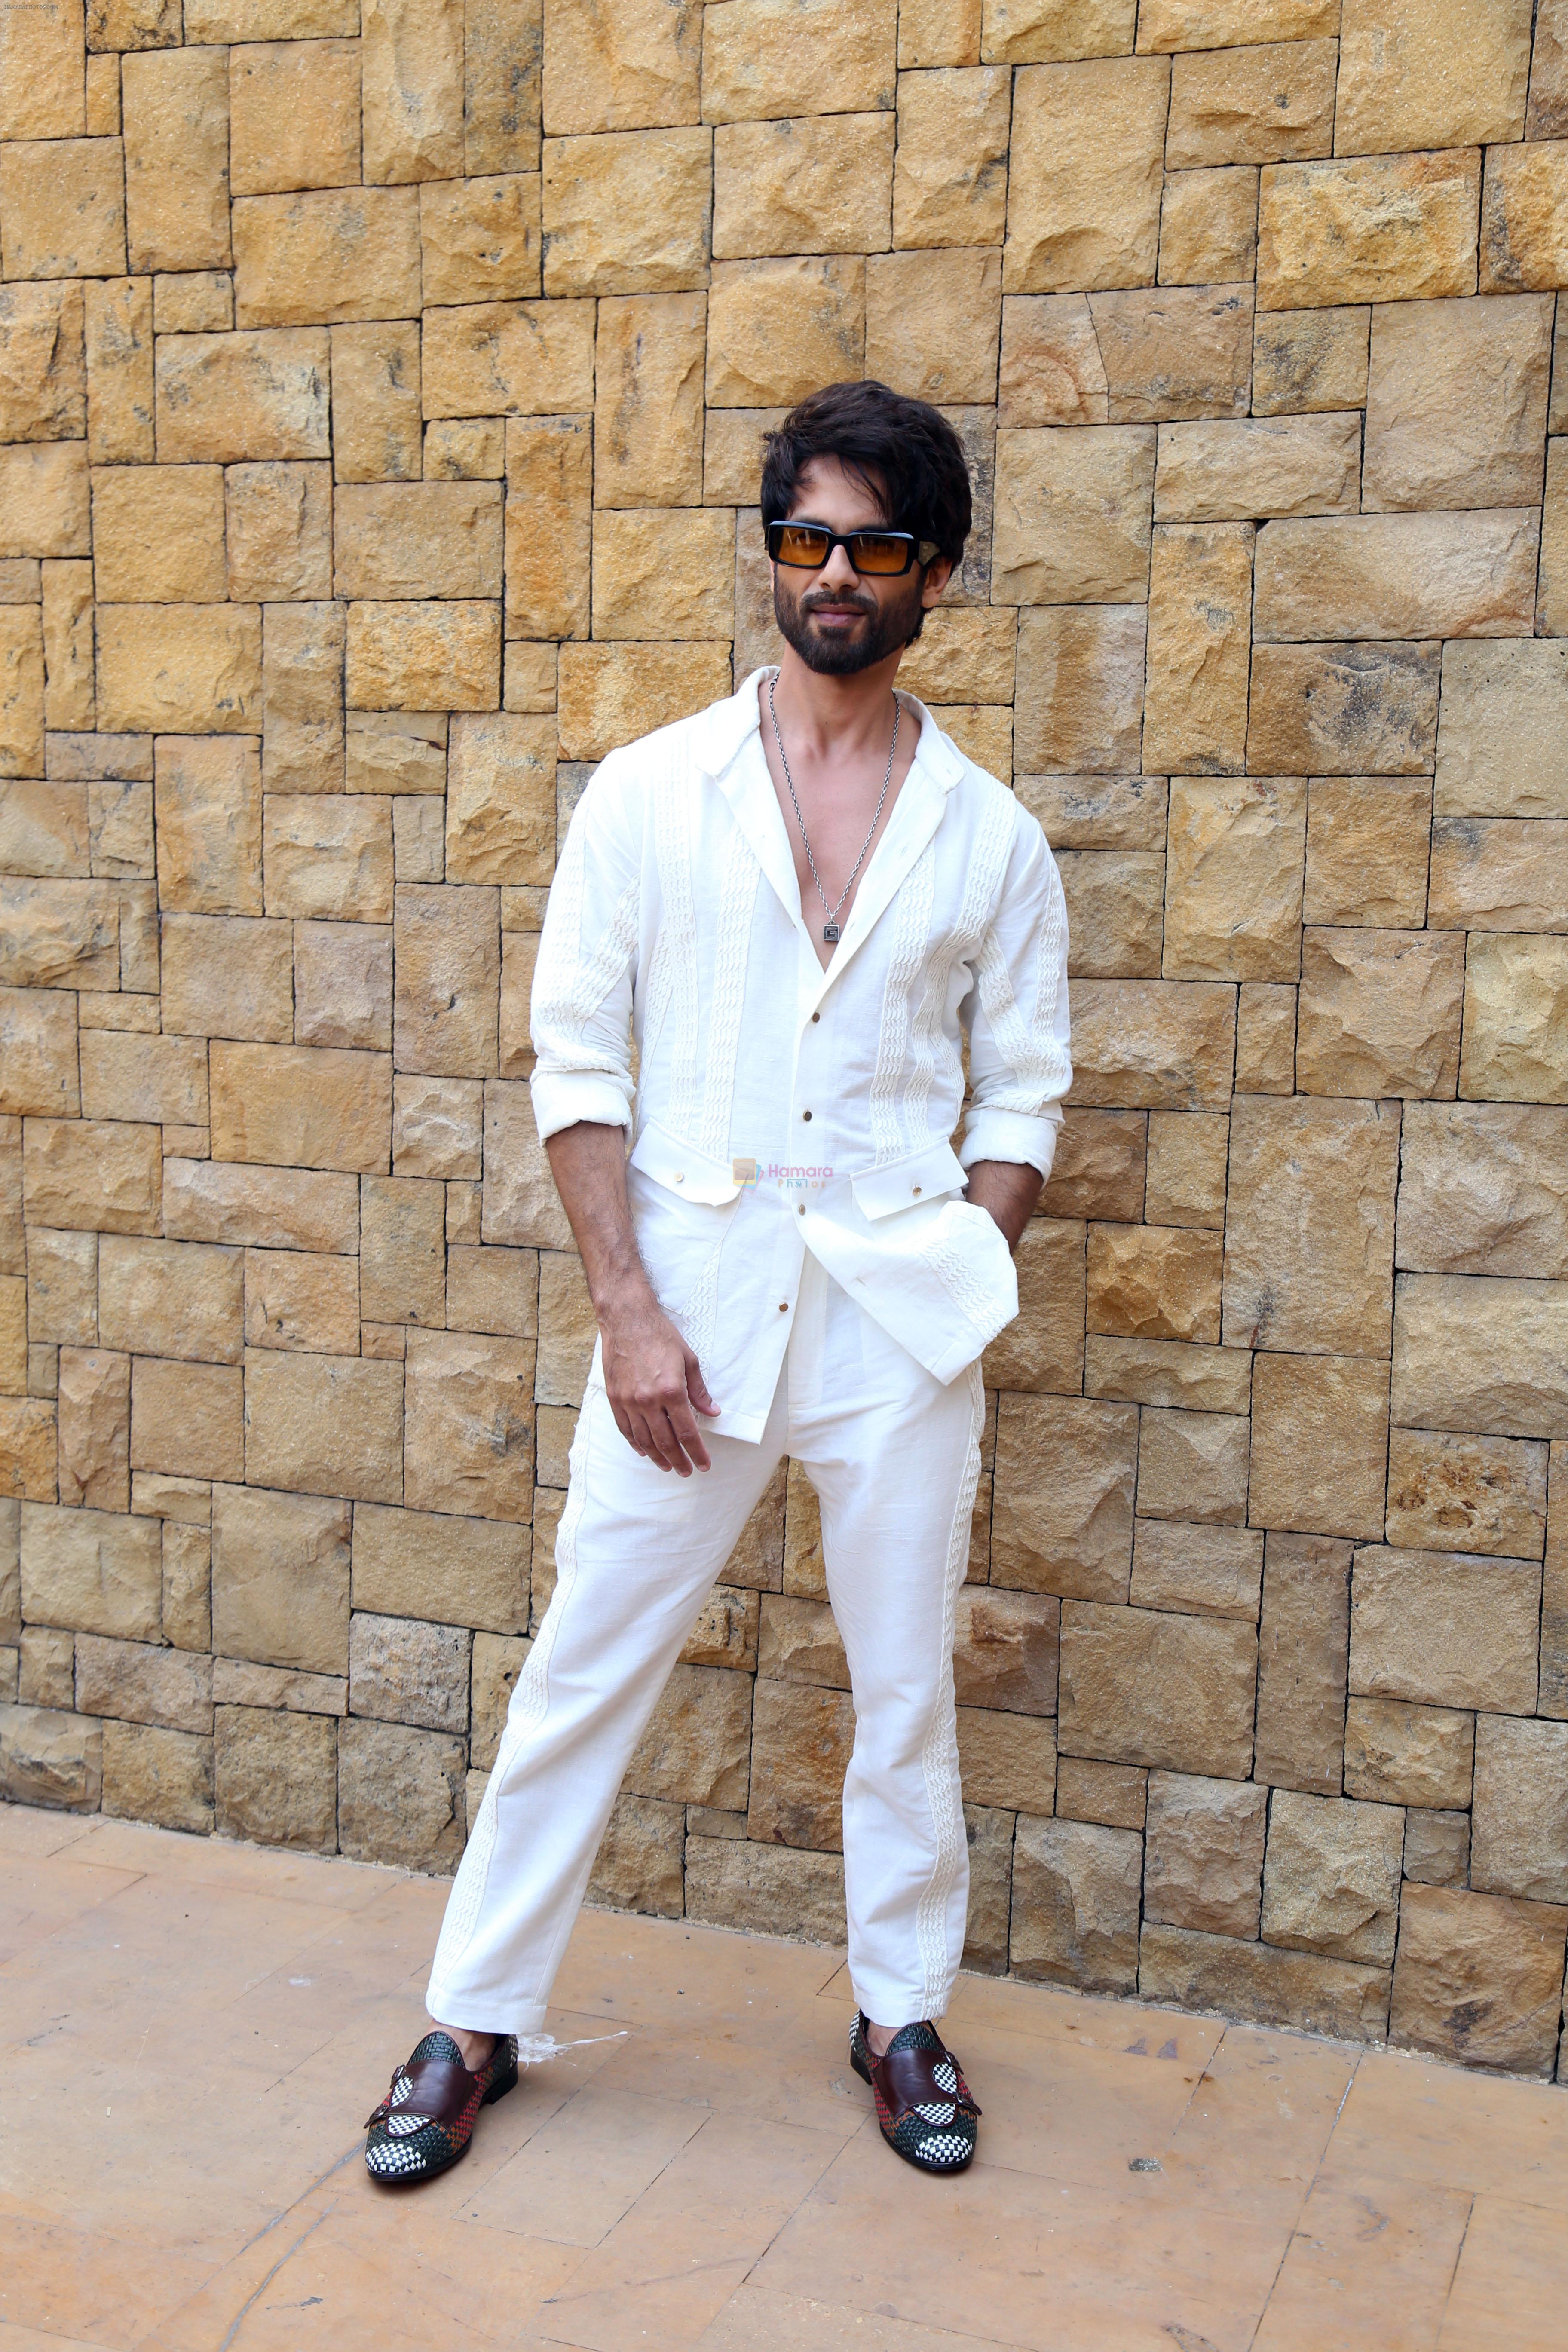 Shahid Kapoor dressed in white shirt and pant and sunglasses promoting his film Bloody Daddy